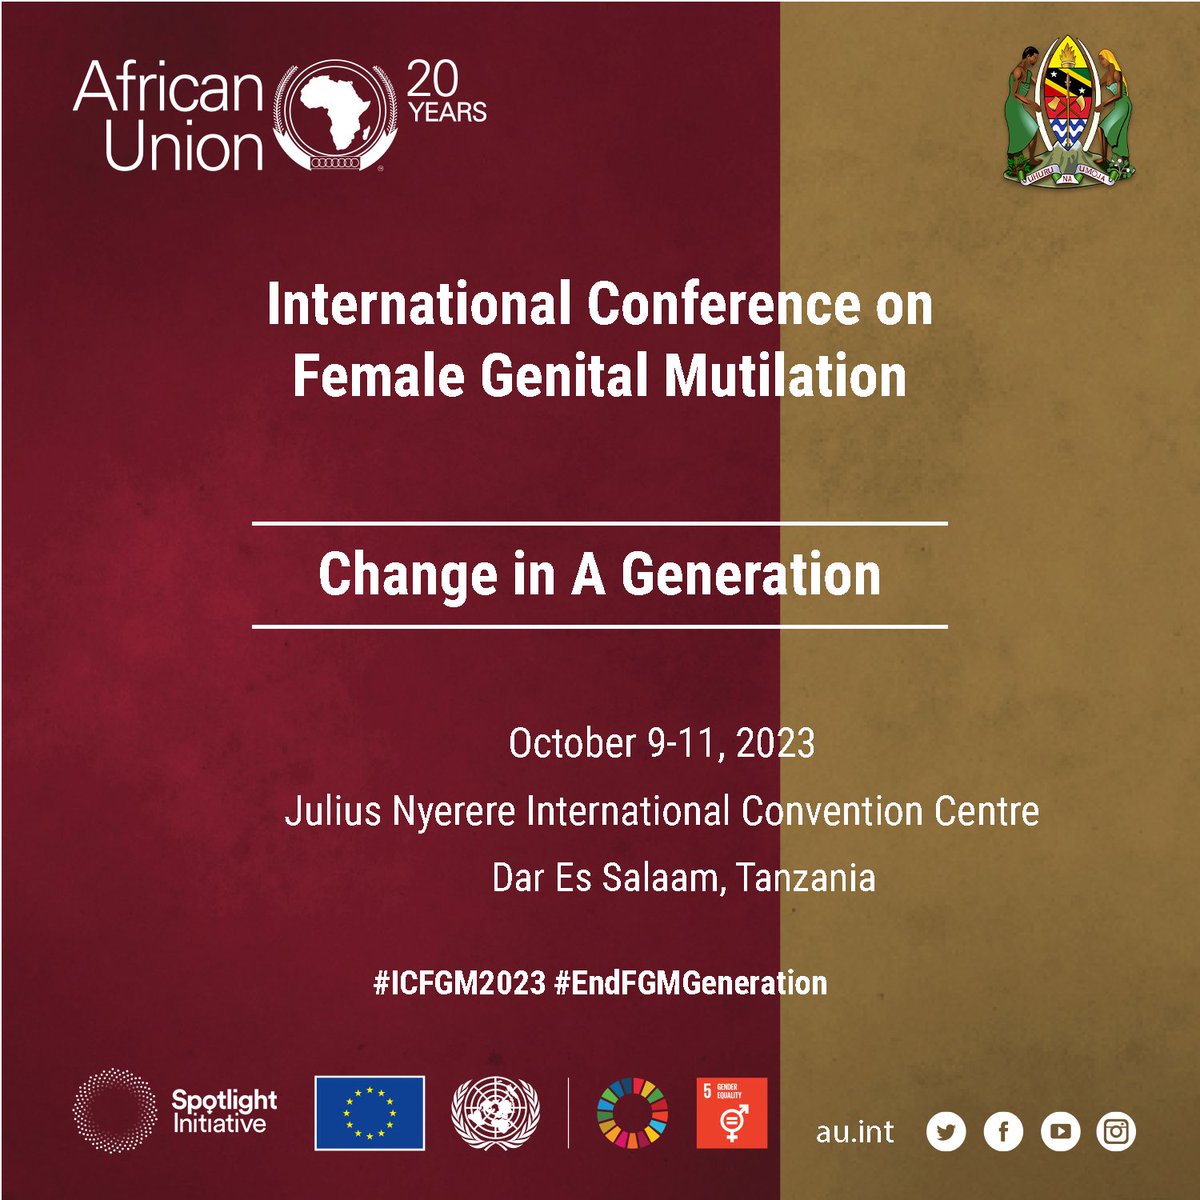 Stand against FGM! Let's raise awareness, create dialogue, and work towards a world free from this violation of human rights. Join us in our effort to #EndFGM. #ICFGM2023 #EndFGMGeneration